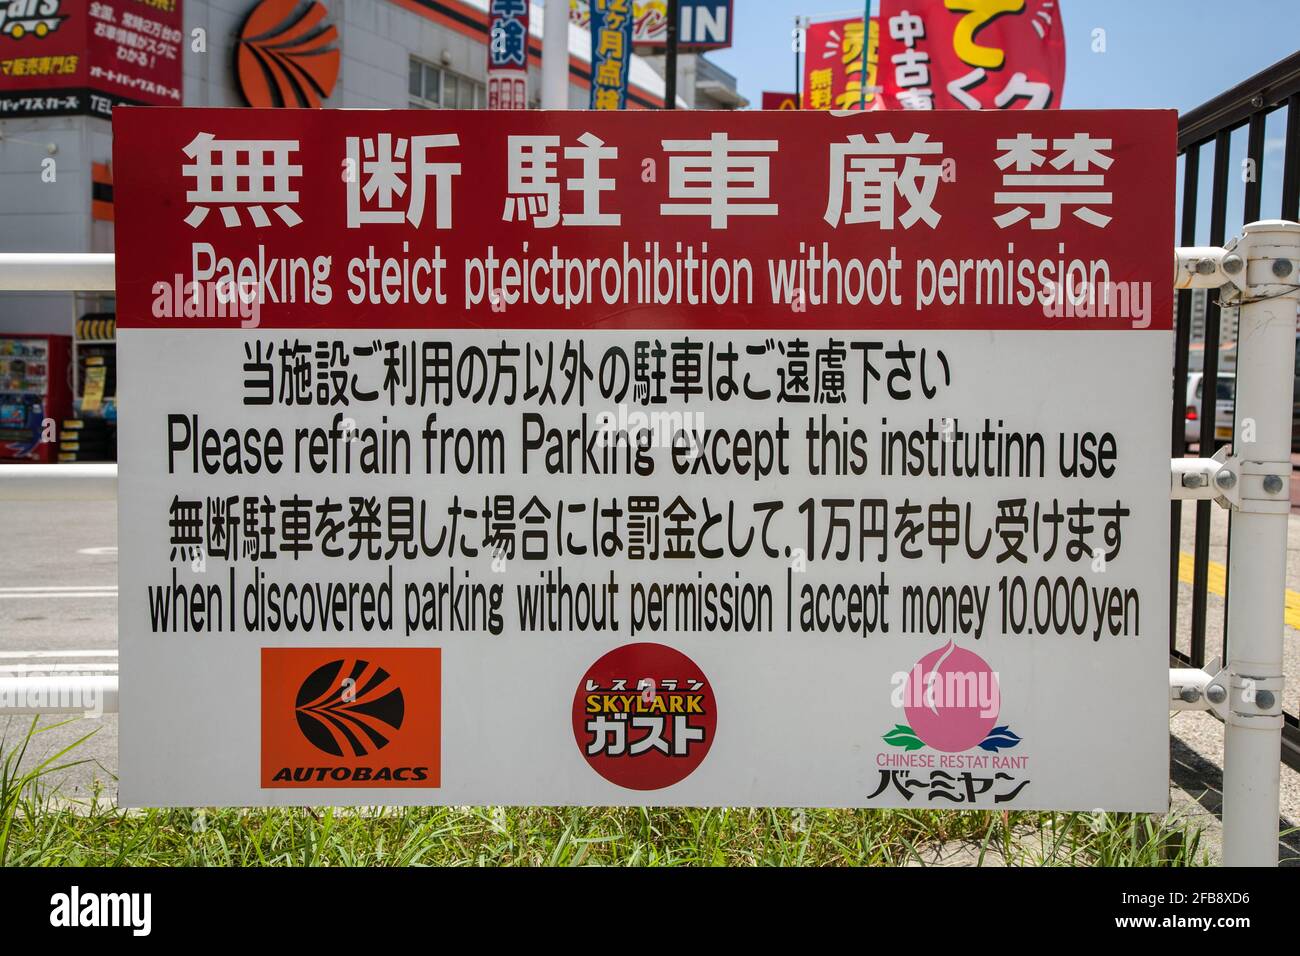 Spelling mistakes and incorrect grammatical English word usage lost in translation of Japanese public parking notice, Naha, Okinawa, Japan Stock Photo